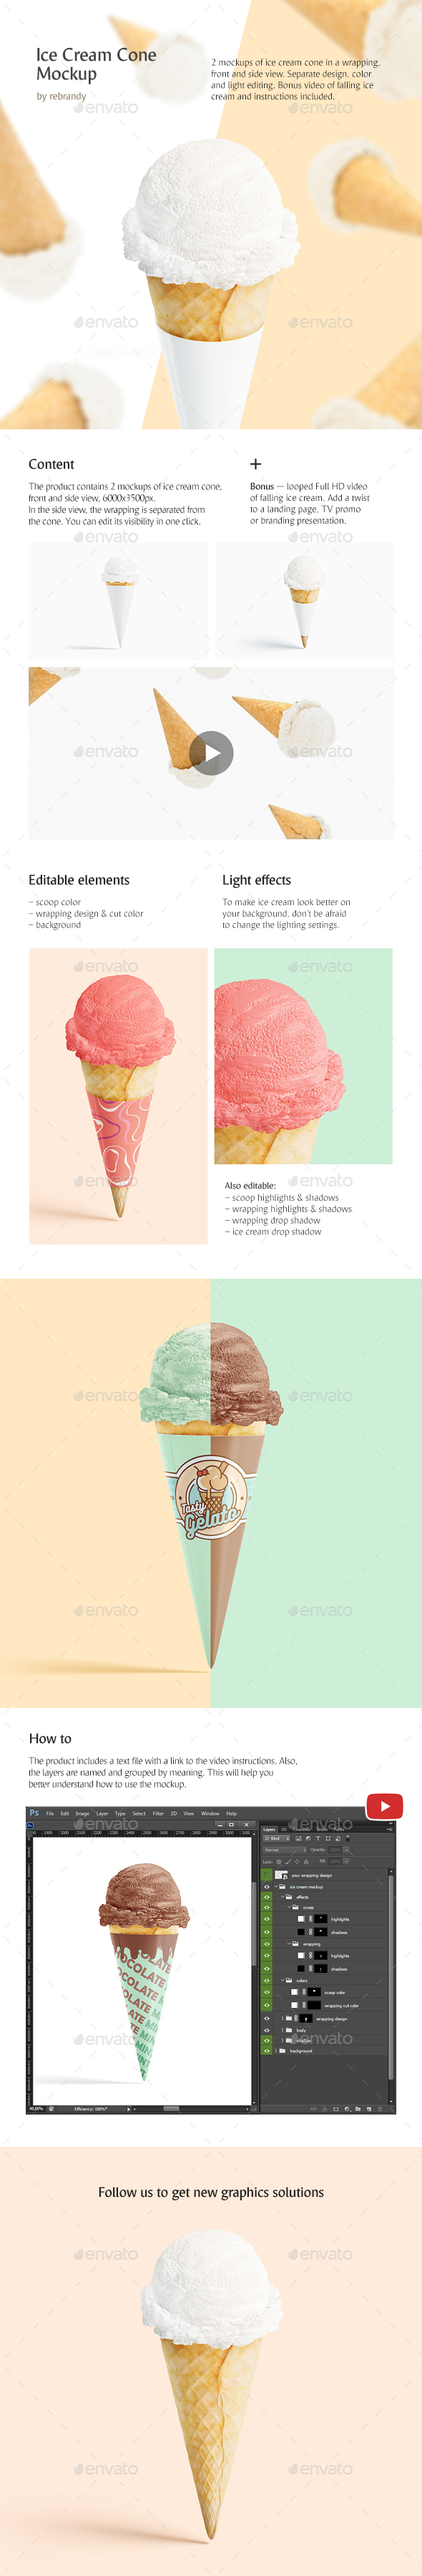 Download Ice Cream Mockup Graphics Designs Templates From Graphicriver